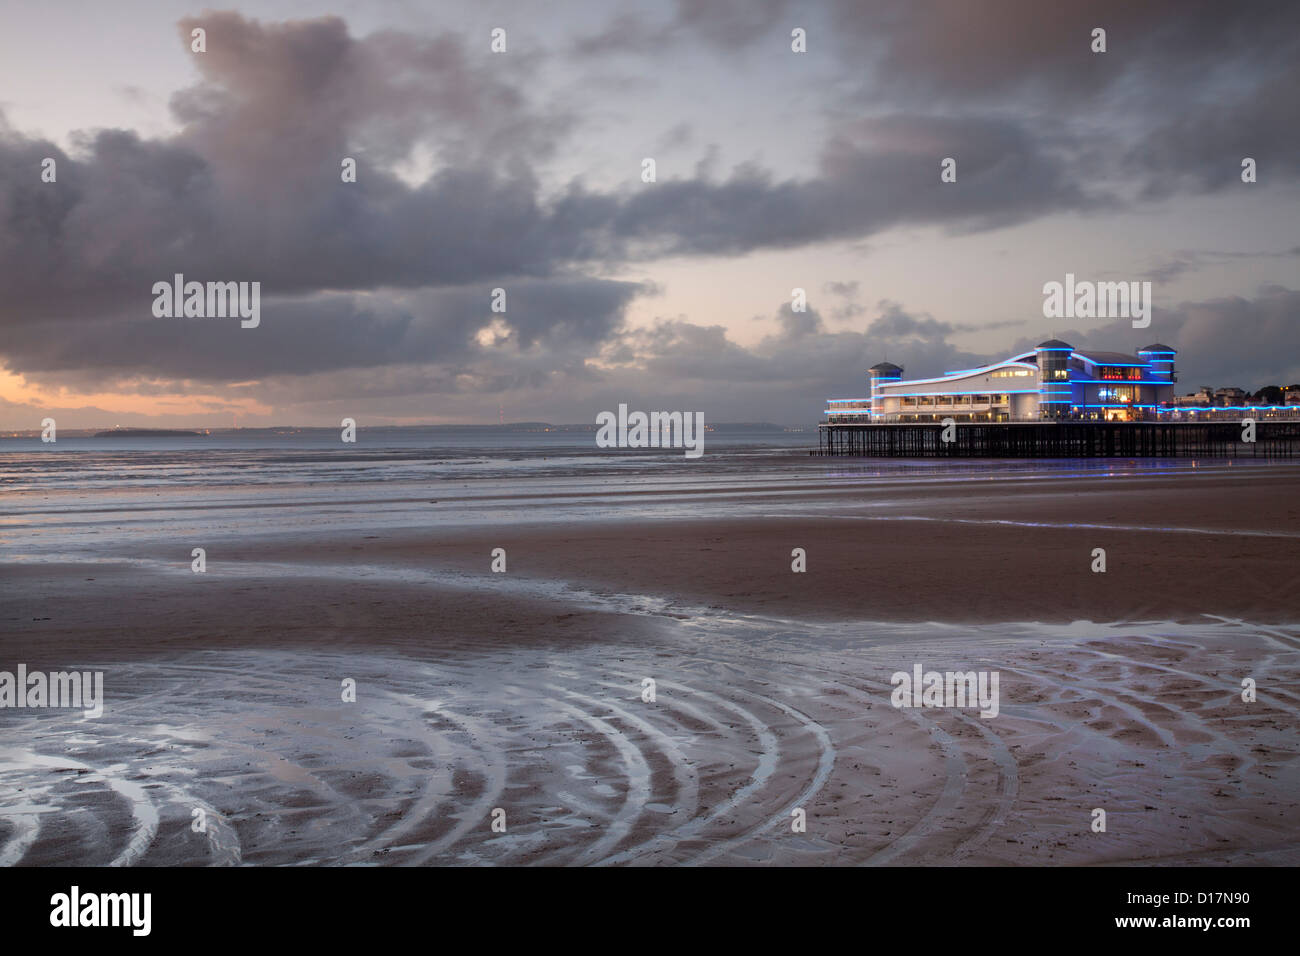 The new Grand Pier at Weston super Mare, Somerset, United Kingdom, at dusk, with a pattern of rivulets in the foreground. Stock Photo